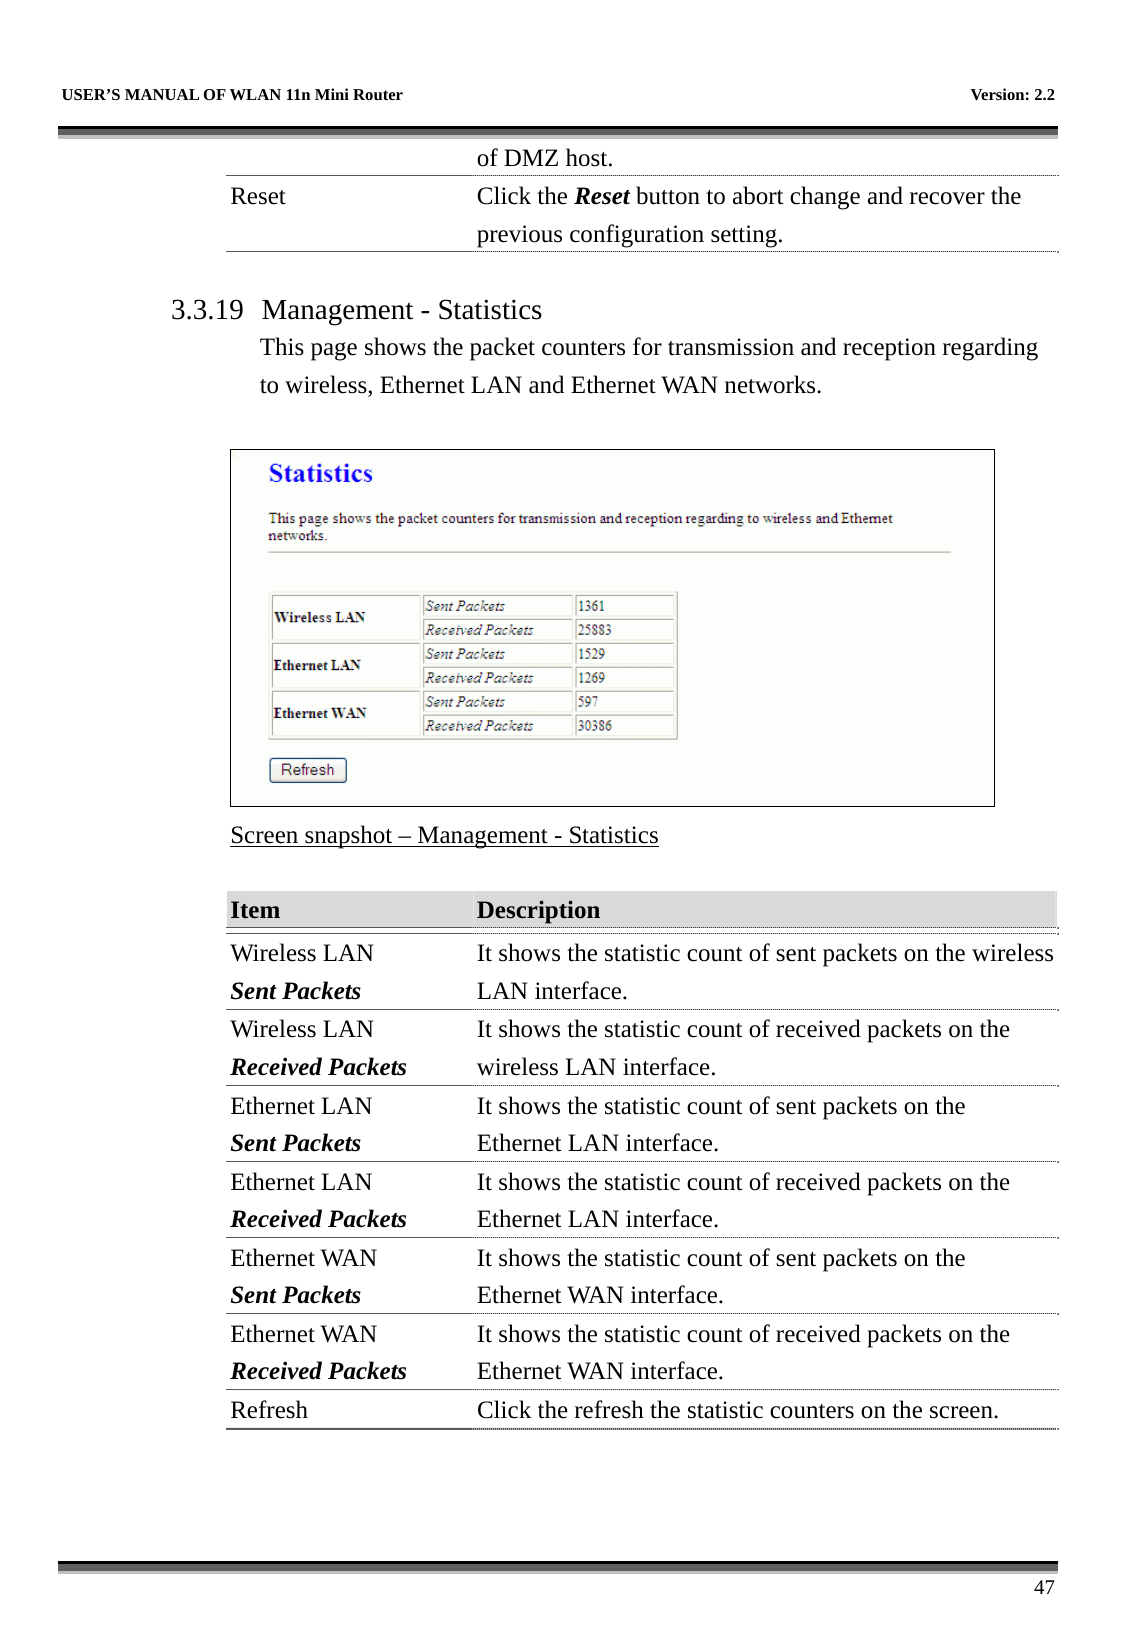   USER’S MANUAL OF WLAN 11n Mini Router    Version: 2.2      47 of DMZ host. Reset Click the Reset button to abort change and recover the previous configuration setting.  3.3.19  Management - Statistics This page shows the packet counters for transmission and reception regarding to wireless, Ethernet LAN and Ethernet WAN networks.   Screen snapshot – Management - Statistics  Item  Description   Wireless LAN Sent Packets It shows the statistic count of sent packets on the wireless LAN interface. Wireless LAN Received Packets It shows the statistic count of received packets on the wireless LAN interface. Ethernet LAN Sent Packets It shows the statistic count of sent packets on the Ethernet LAN interface. Ethernet LAN Received Packets It shows the statistic count of received packets on the Ethernet LAN interface. Ethernet WAN Sent Packets It shows the statistic count of sent packets on the Ethernet WAN interface. Ethernet WAN Received Packets It shows the statistic count of received packets on the Ethernet WAN interface. Refresh  Click the refresh the statistic counters on the screen.  